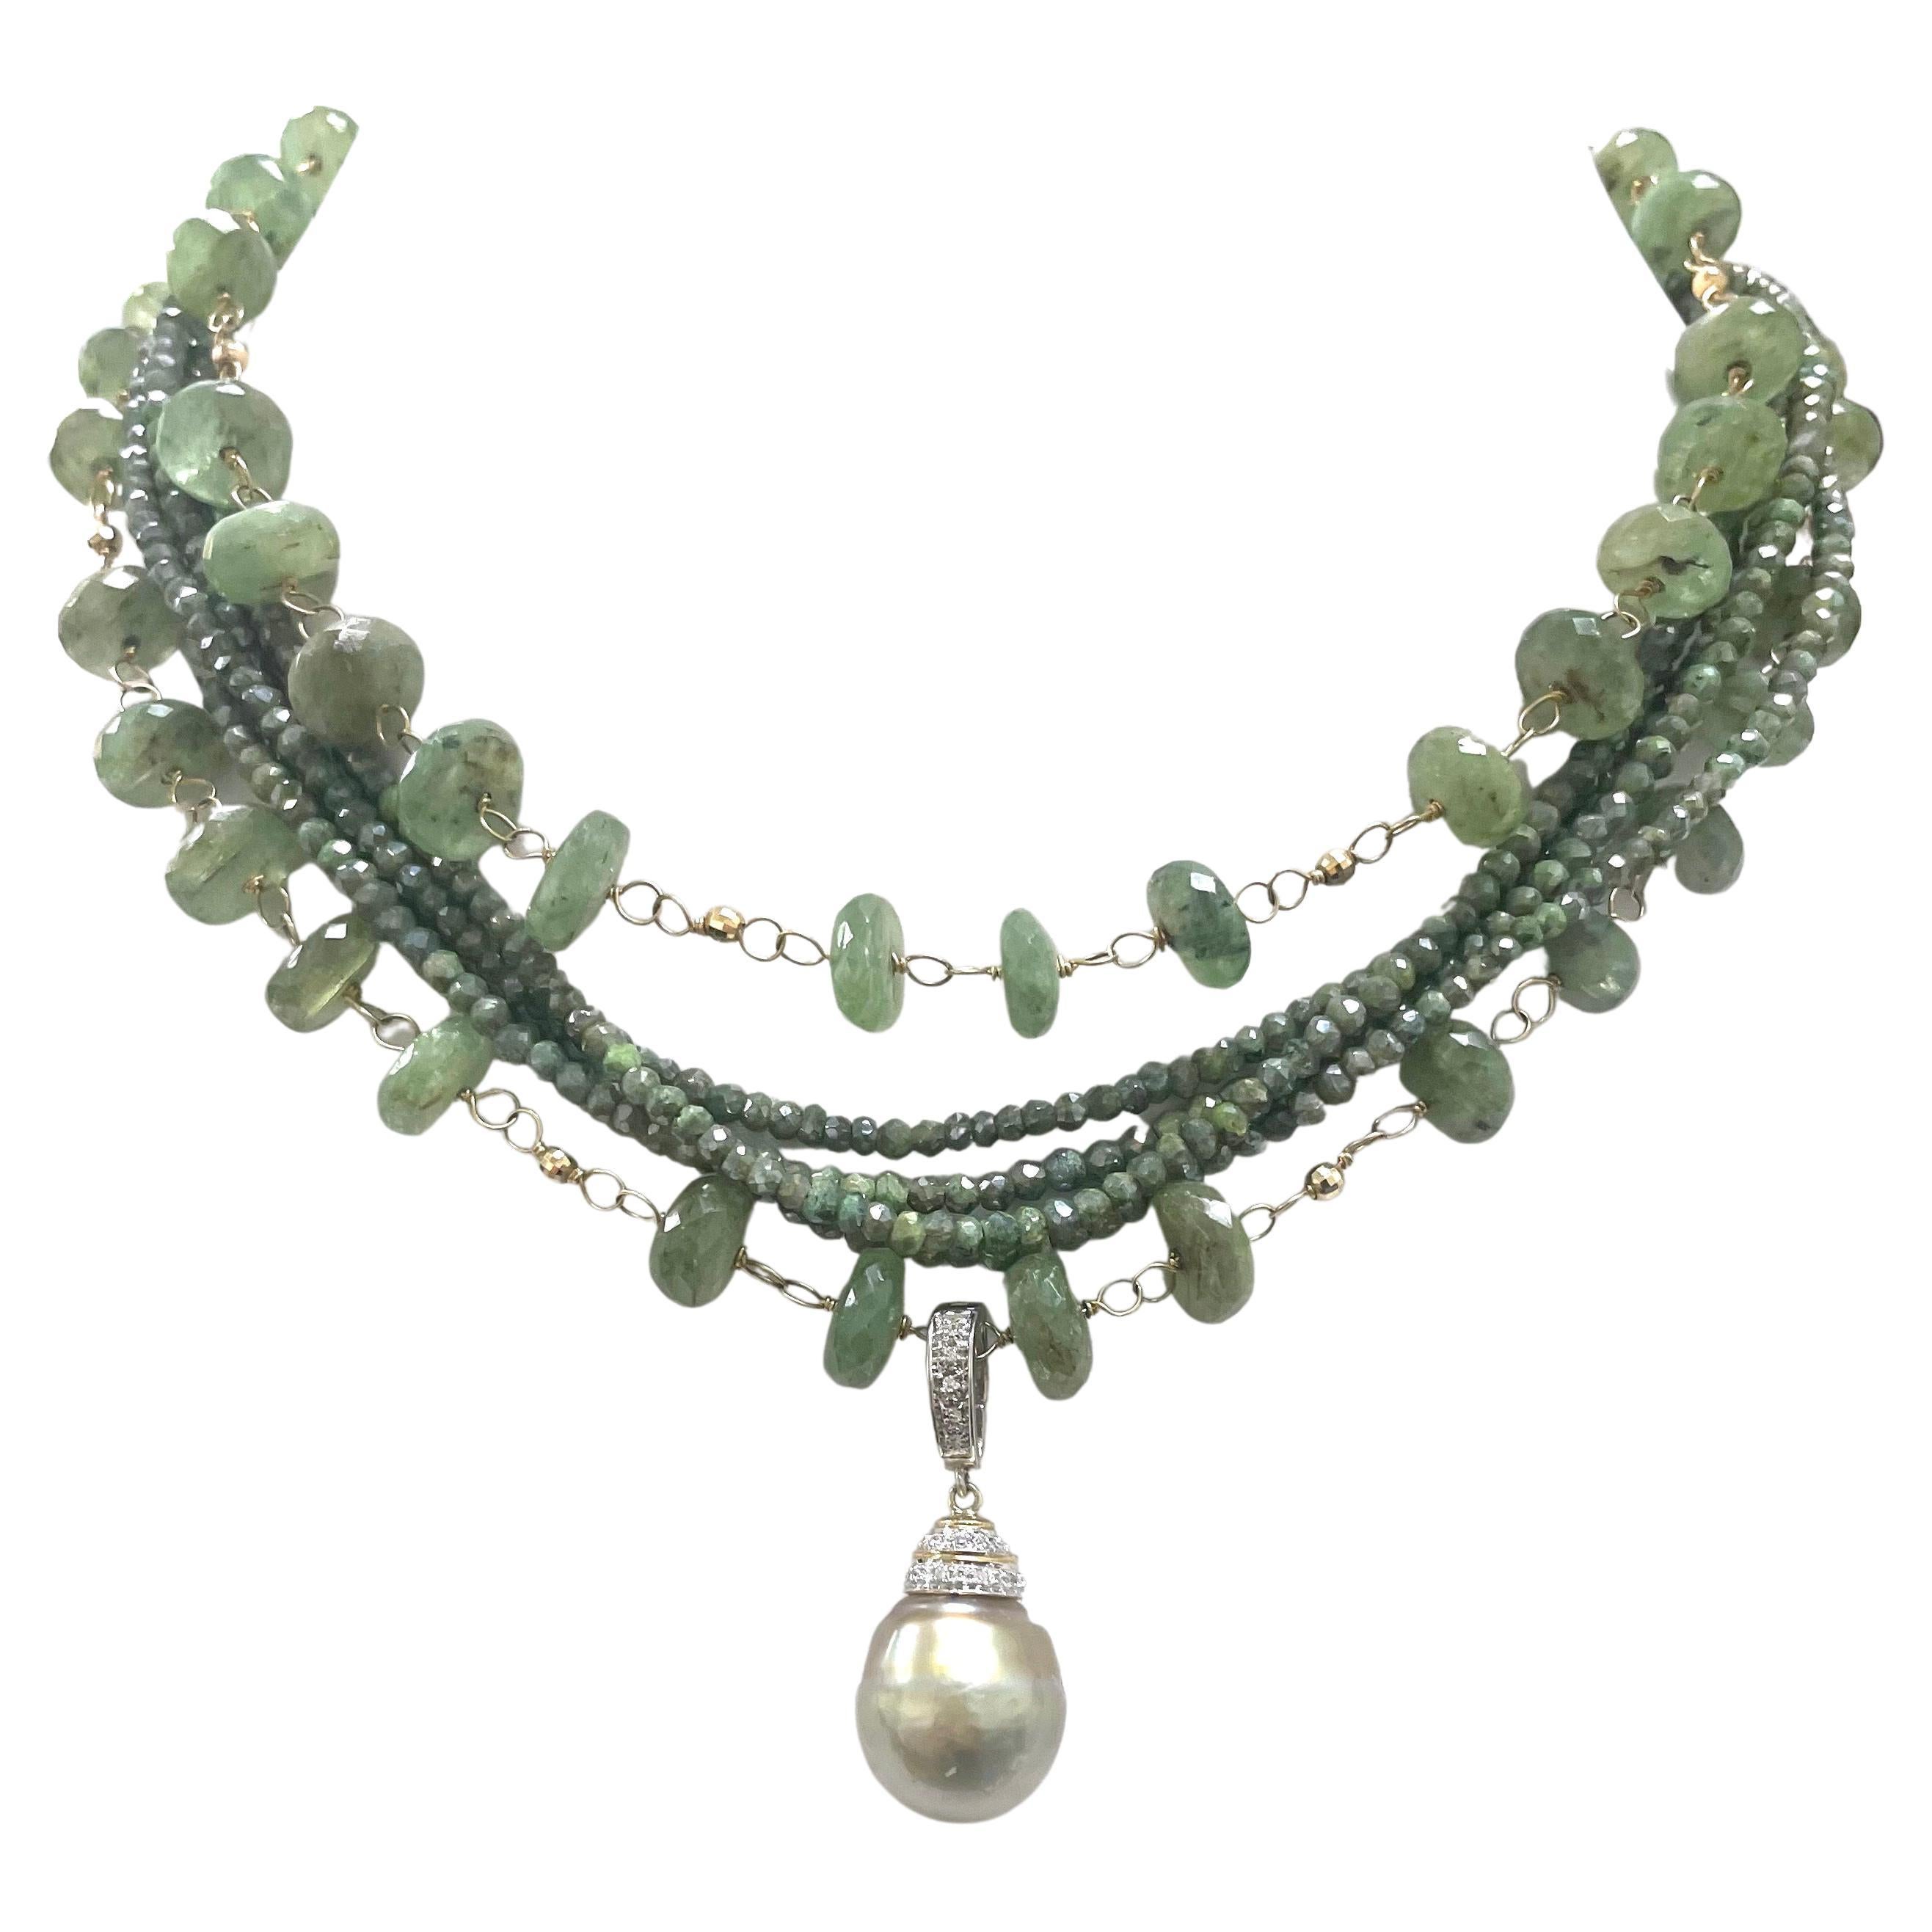 Green Kyanite and Silverite Multistrand Paradizia Necklace with Tahitian Pendant For Sale 5